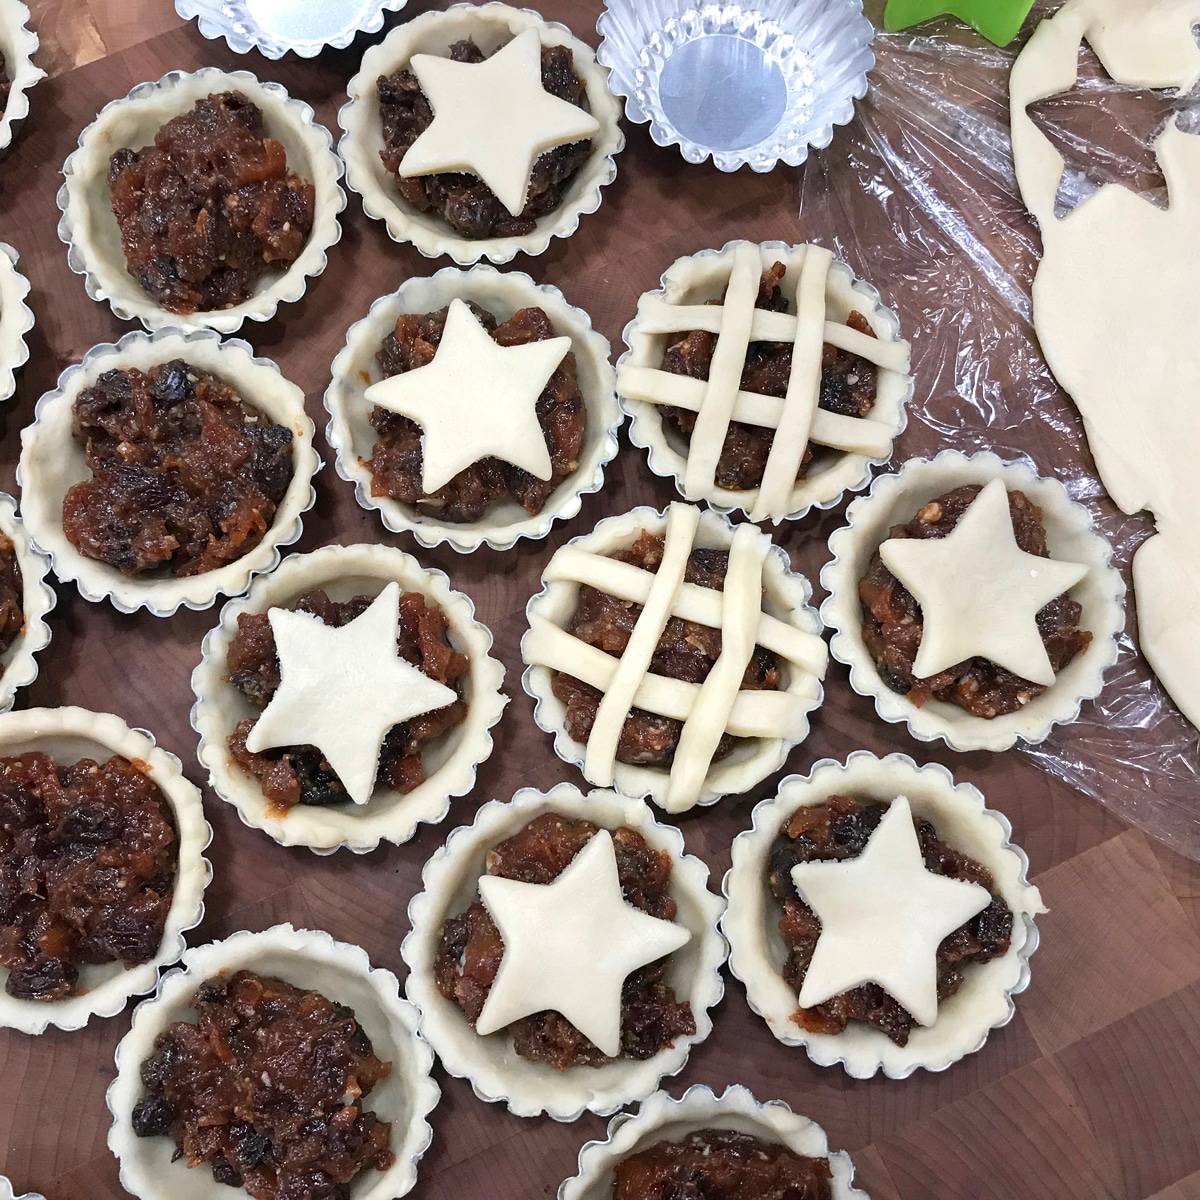 mincemeat pie recipe best traditional authentic British English from scratch